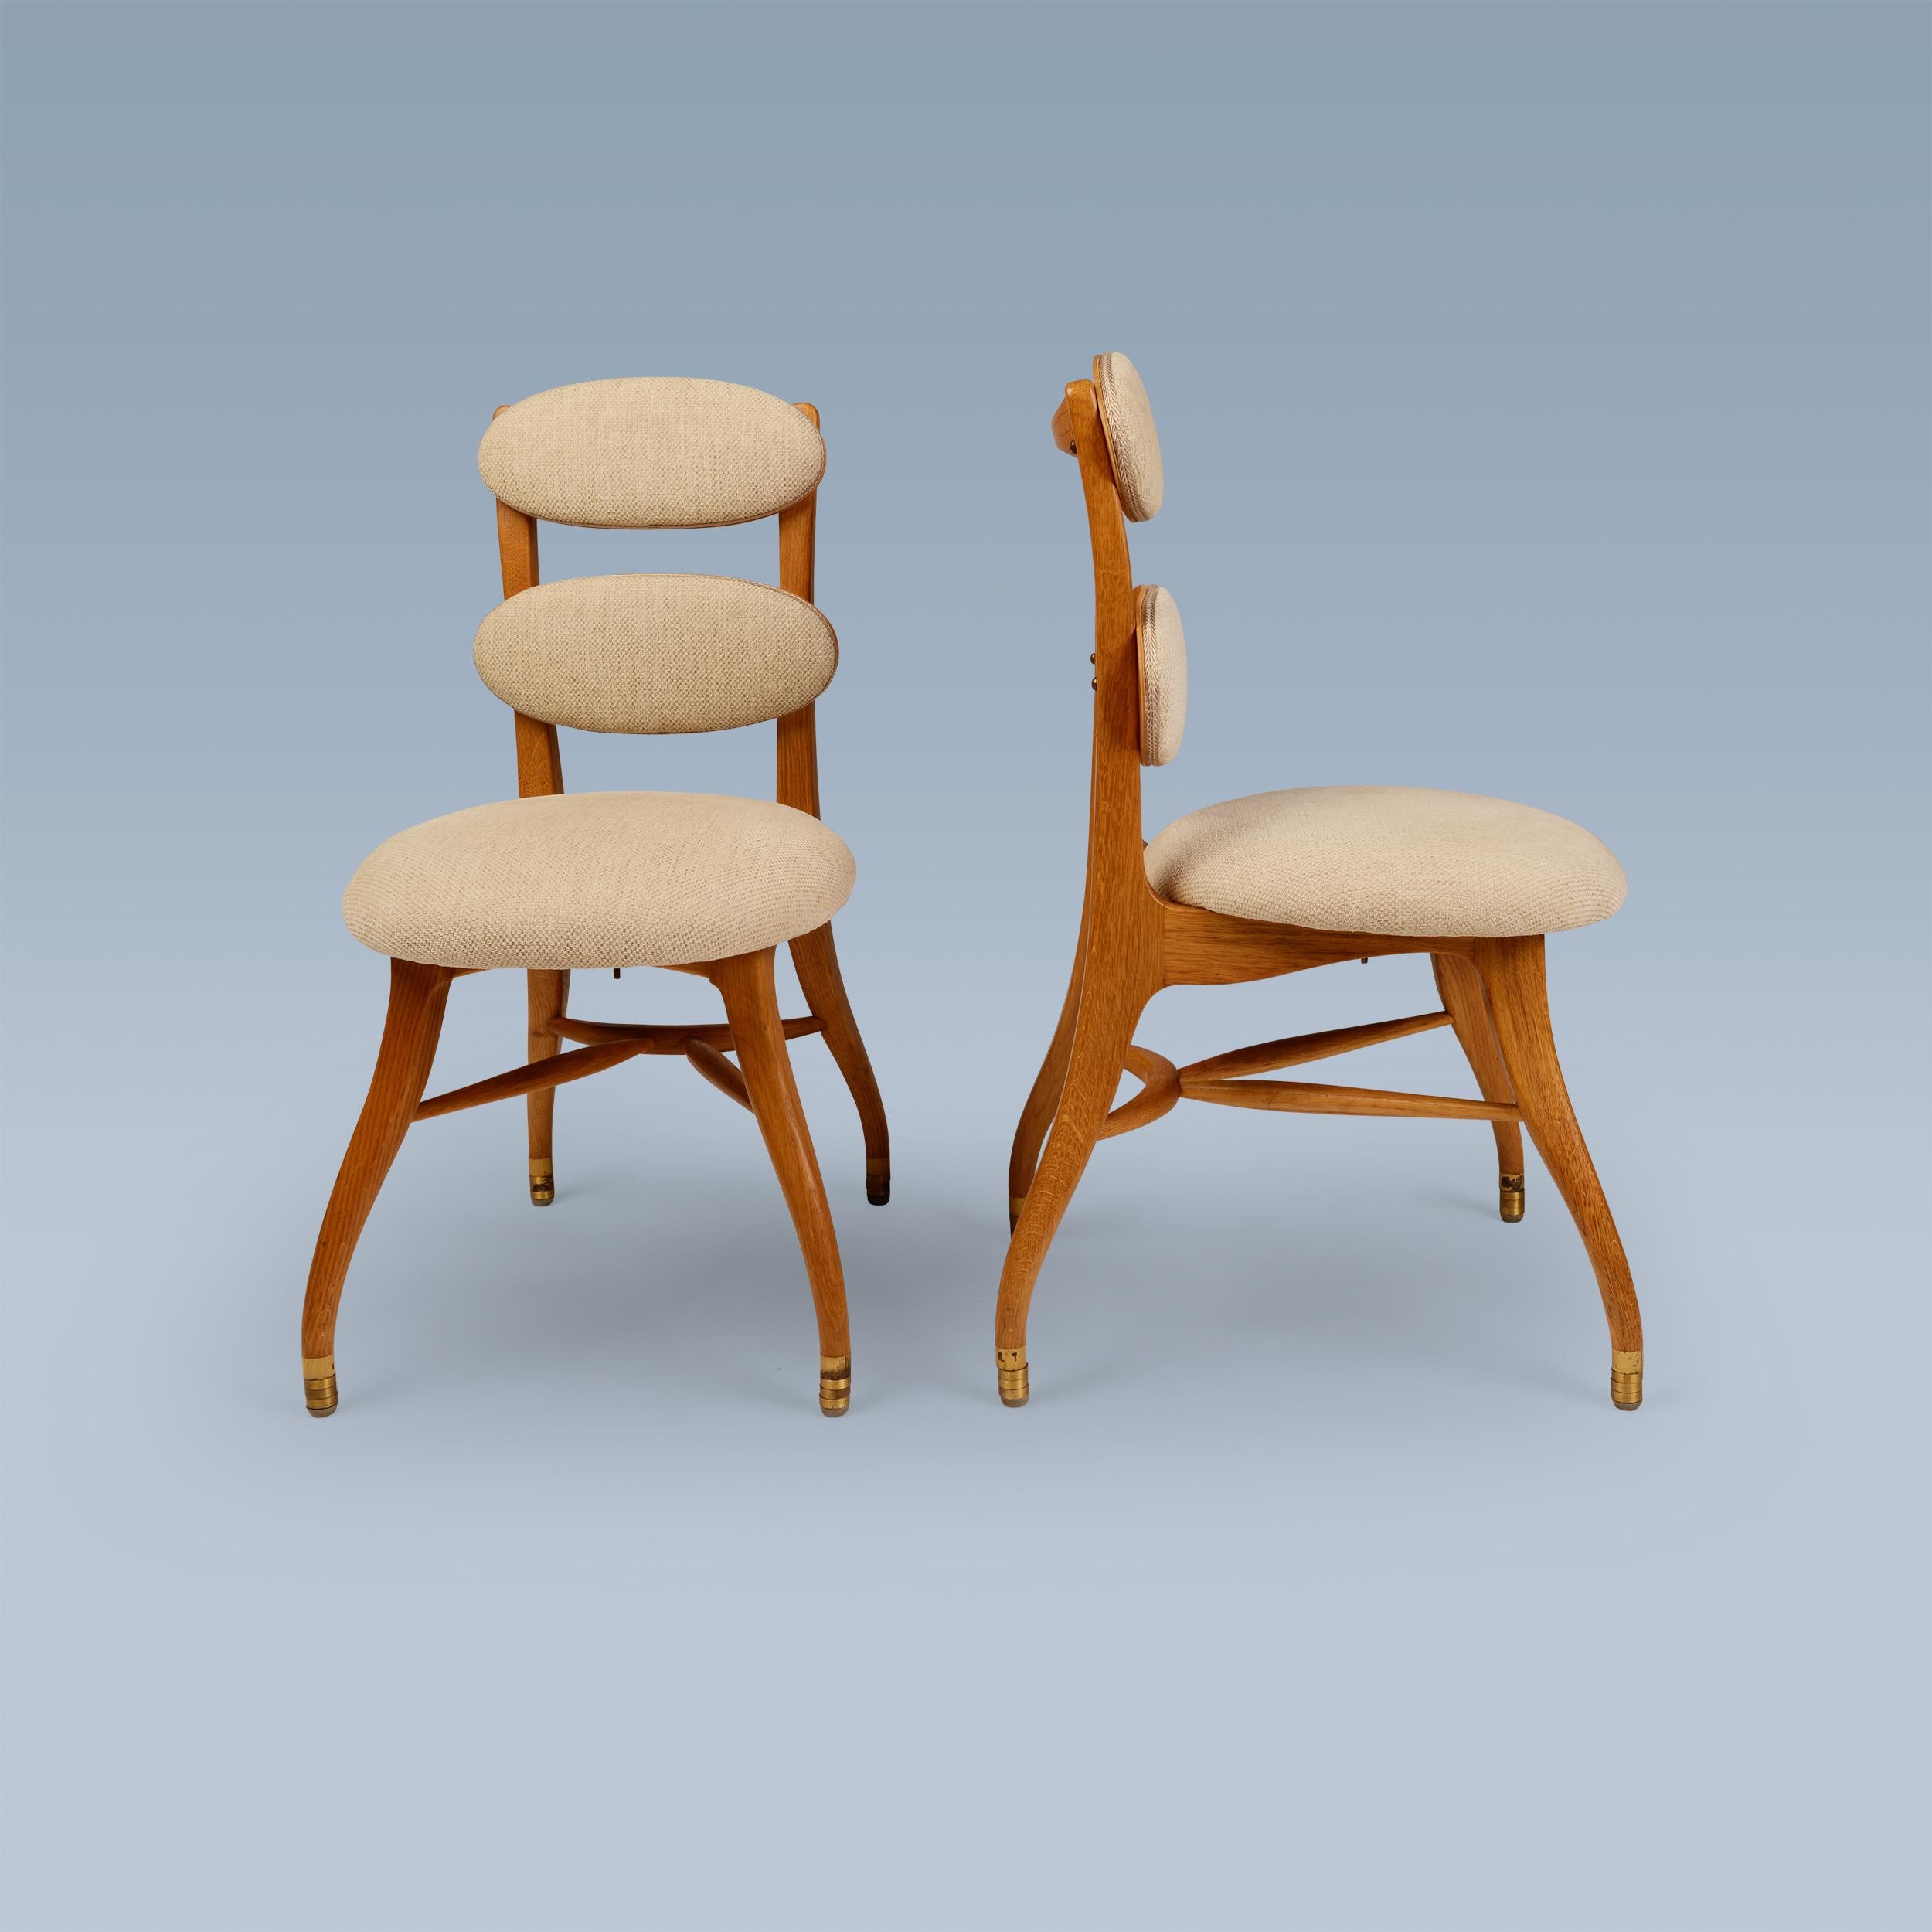 This pair of very rare chairs was designed in 1942 by Vilhelm Lauritzen for the iconic Radiohuset building in Copenhagen. They are designed for the musicians / the orchestra. They have an oak frame and brass feet. Their seats and two backrests can